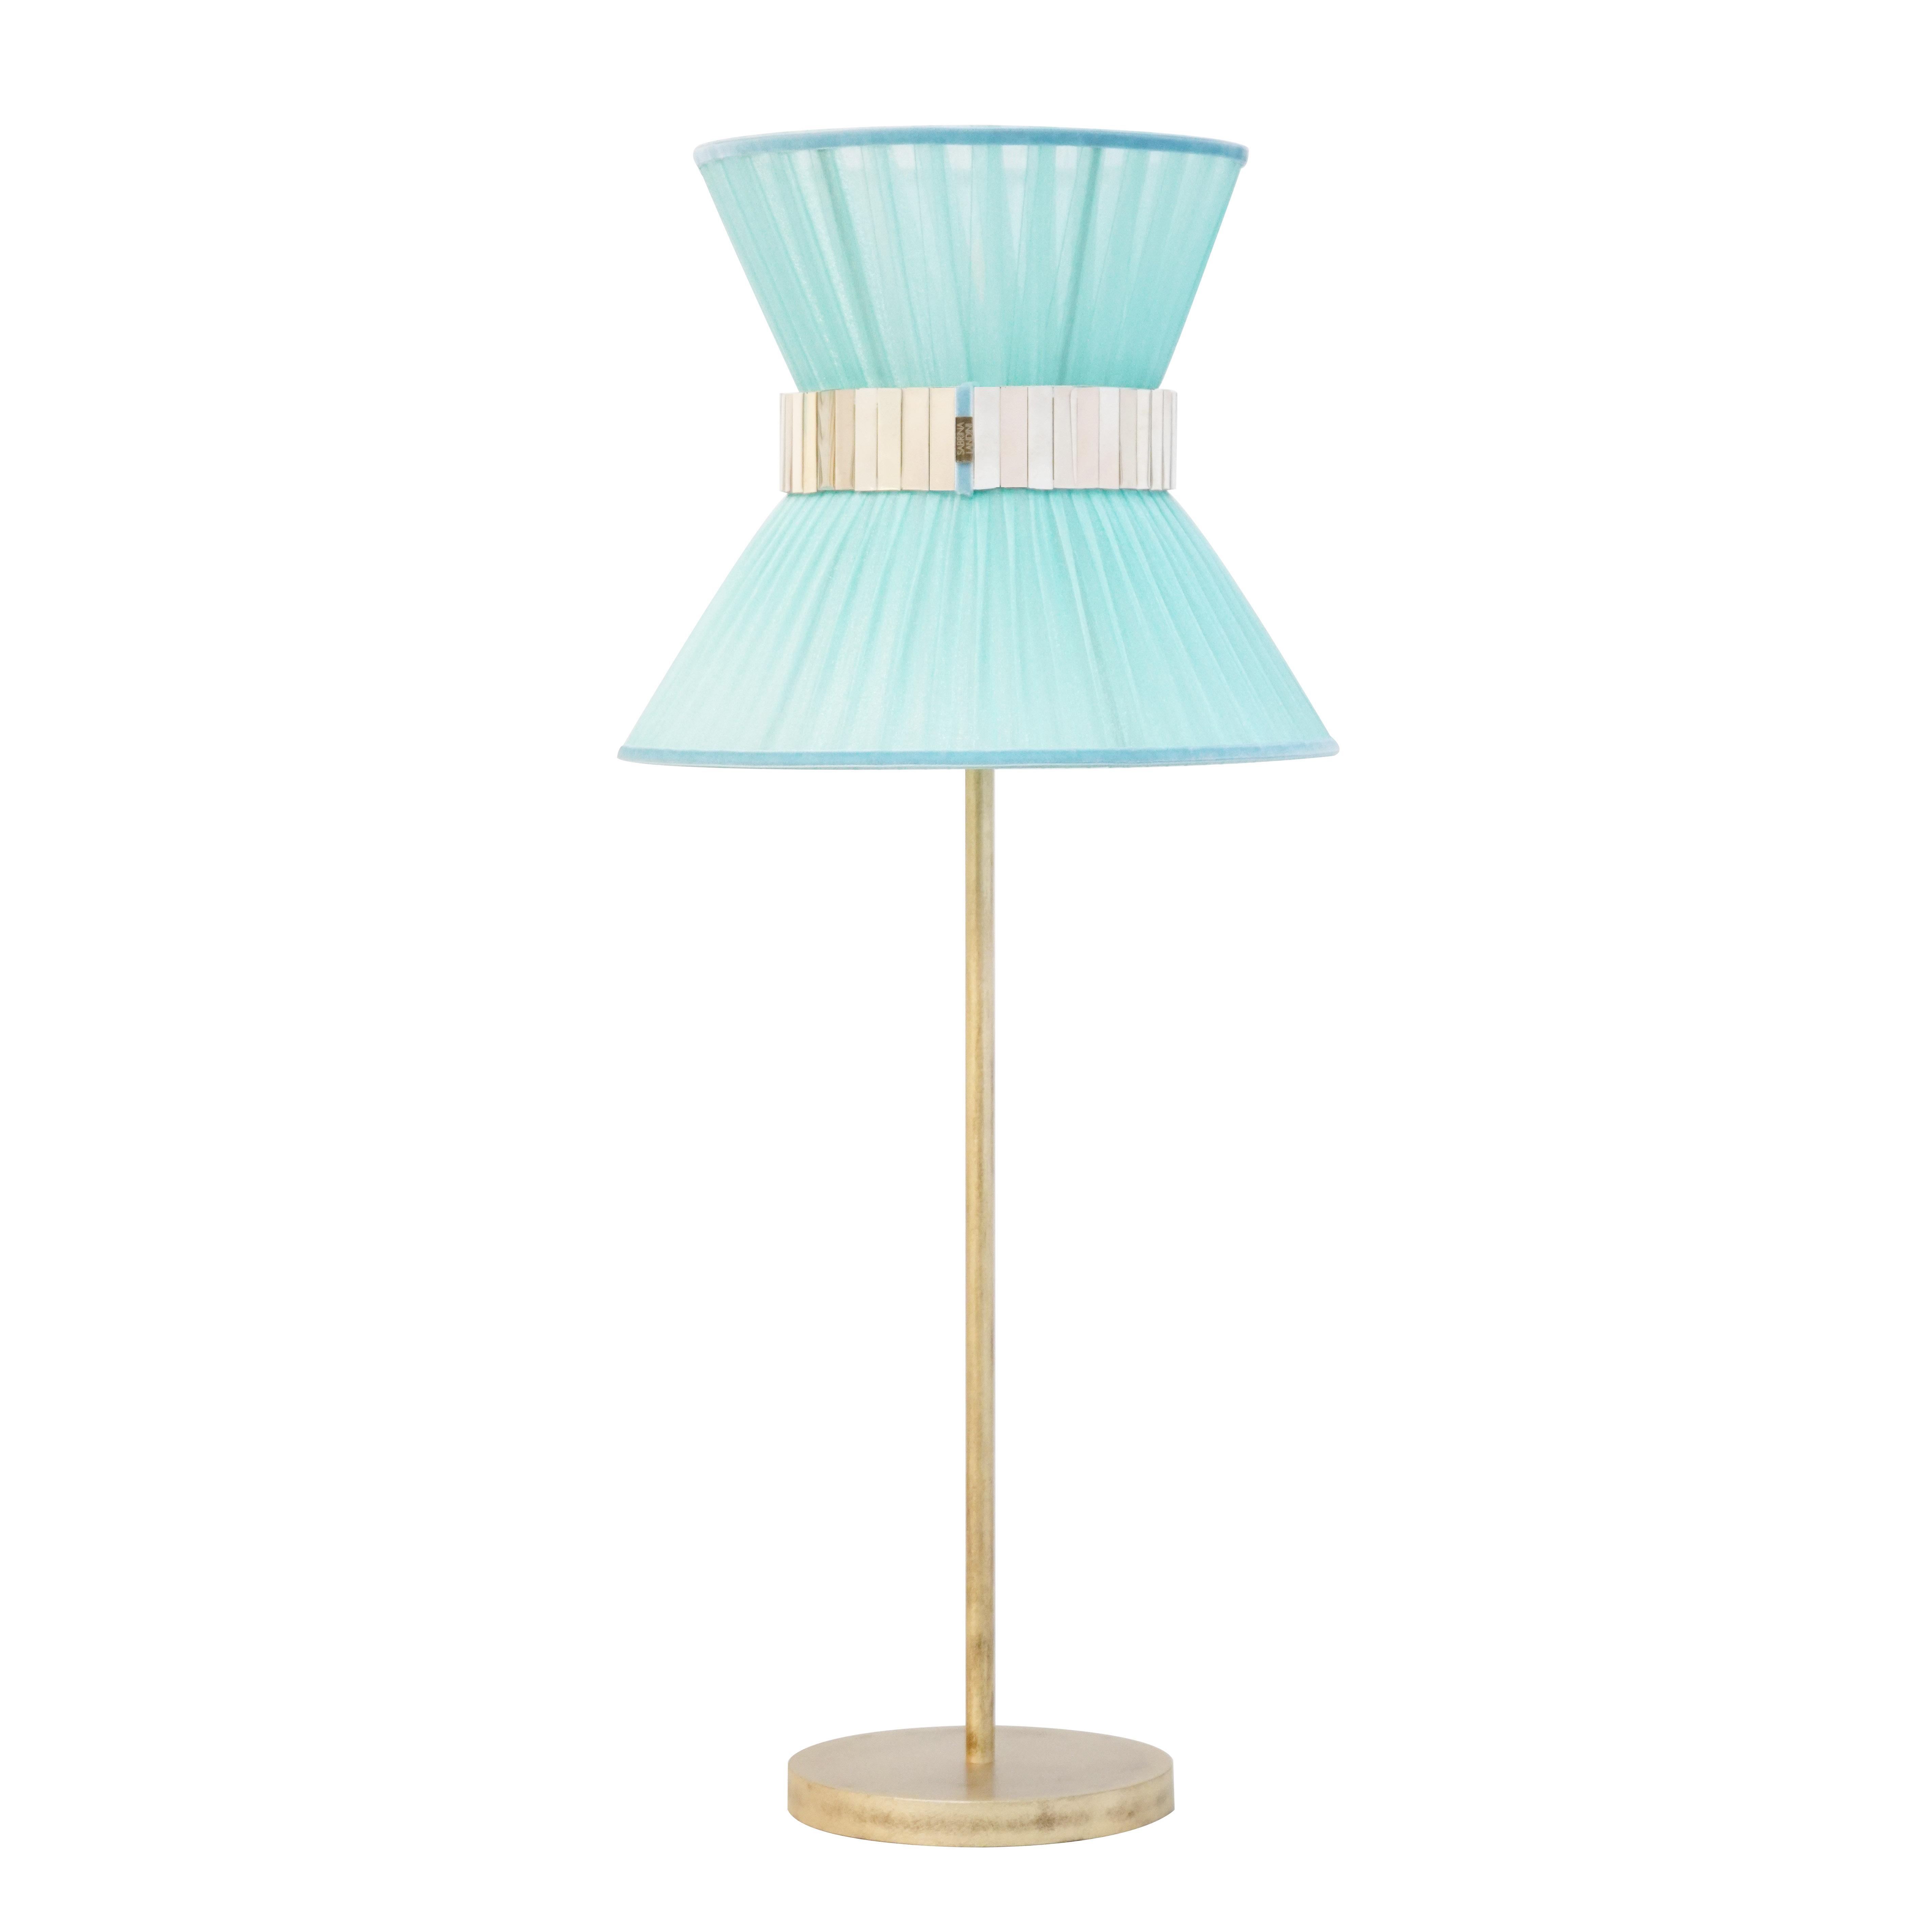 TIFFANY the iconic lamp!

For 20 years, we have perpetuated our unique manufacturing method. Inspired by unlimited glass reflections, Sabrina Landini has created an elegant home collection.
In case you find yourself in Tuscany - Italy, embark on a